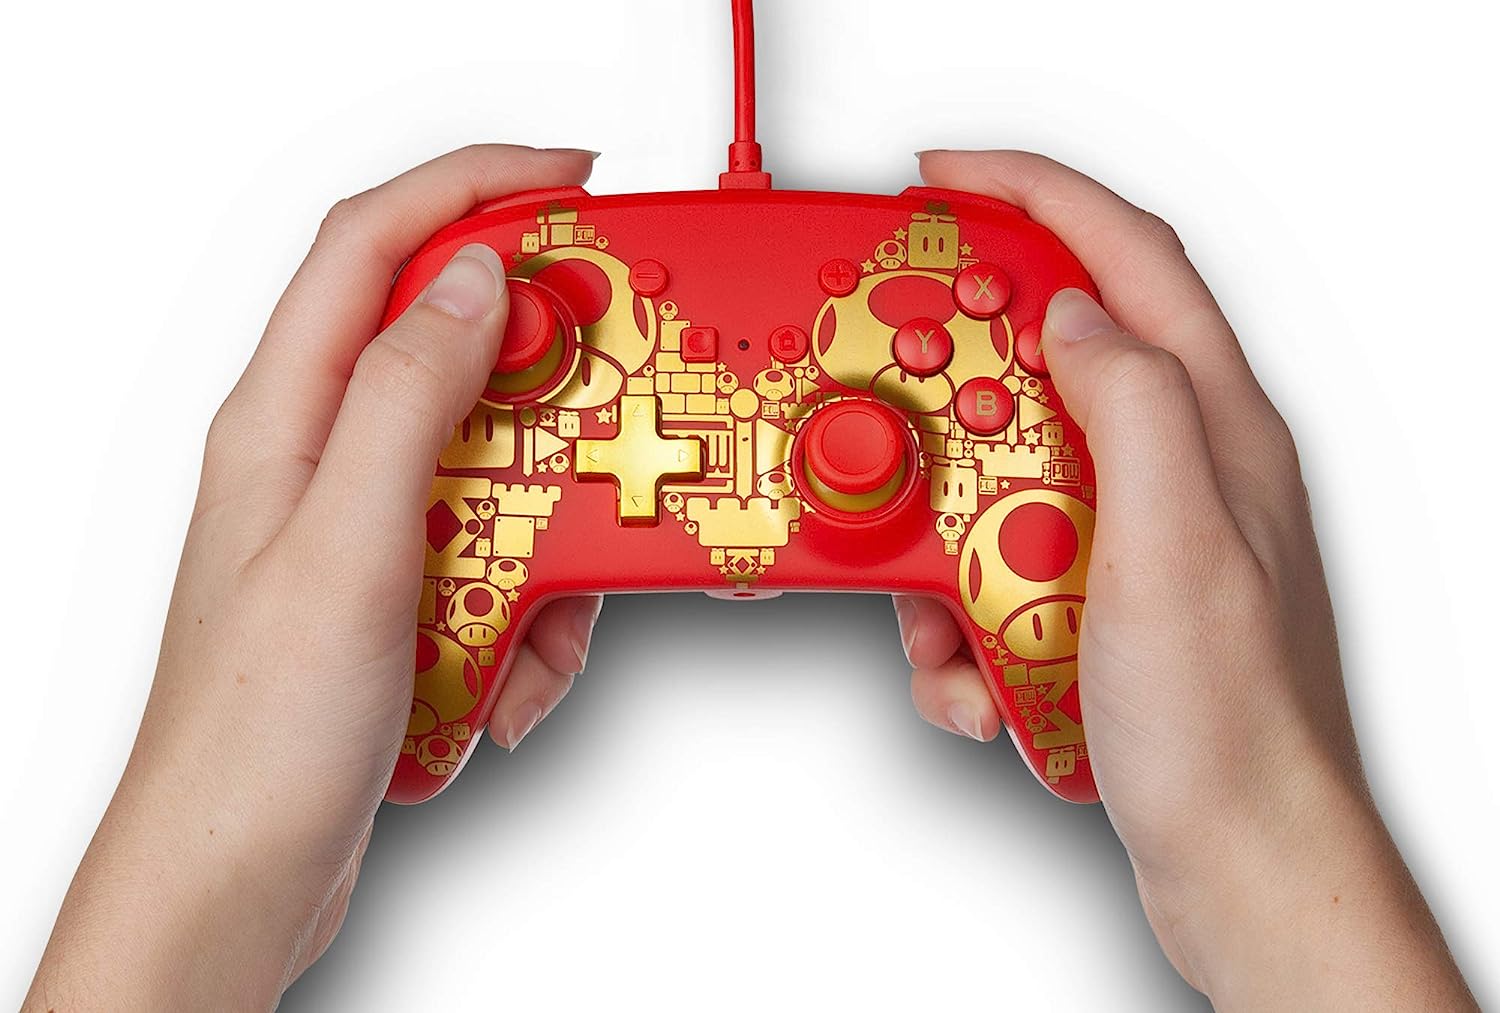 PowerA Enhanced Wired Super Mario Controller For Nintendo Switch - Red/Gold